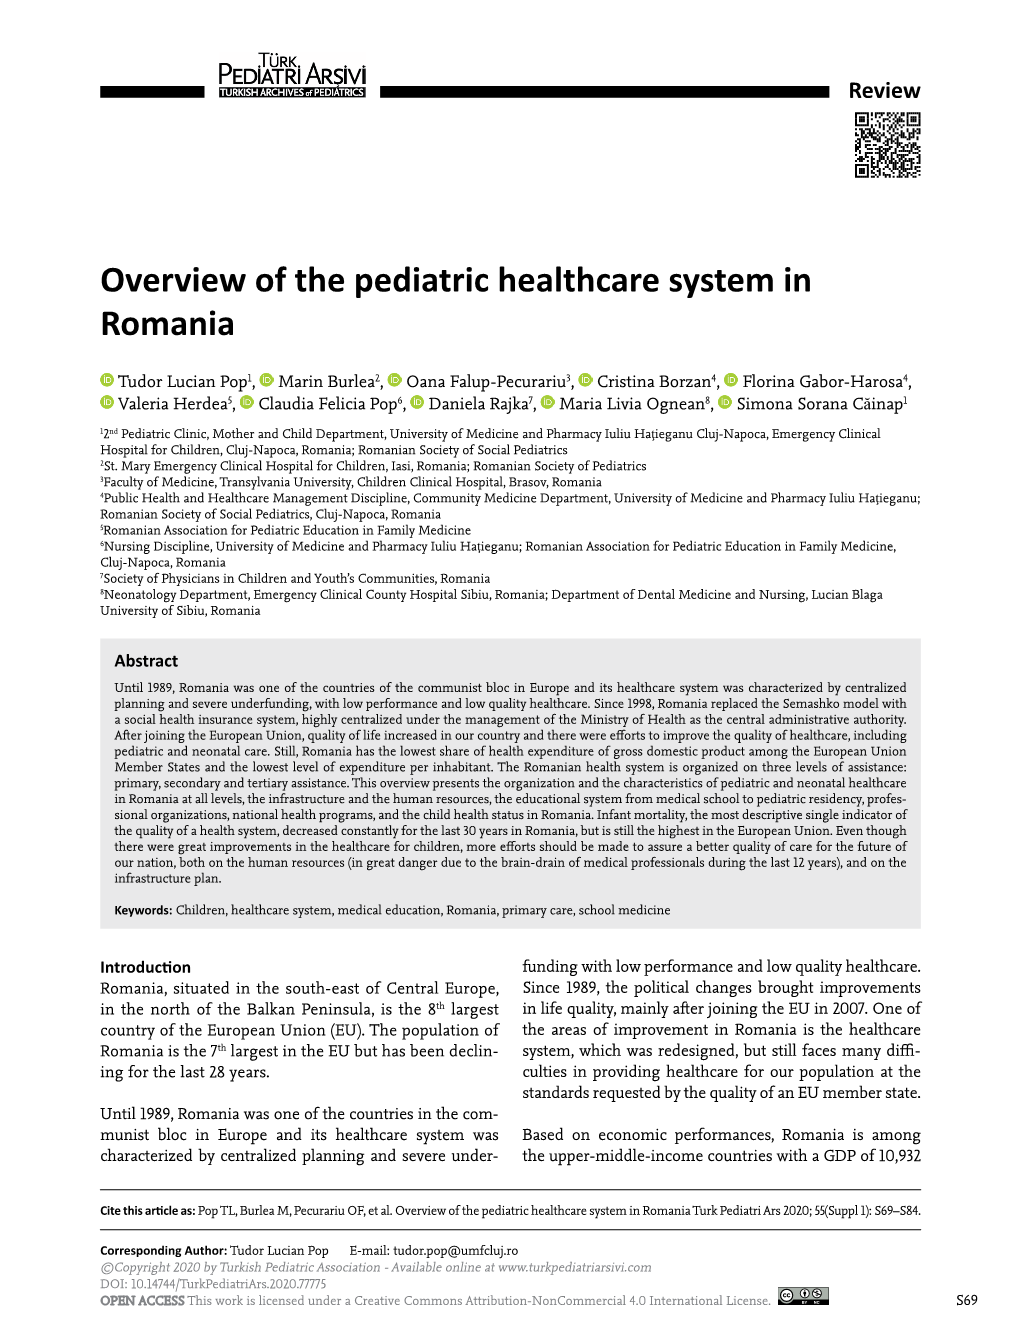 Overview of the Pediatric Healthcare System in Romania